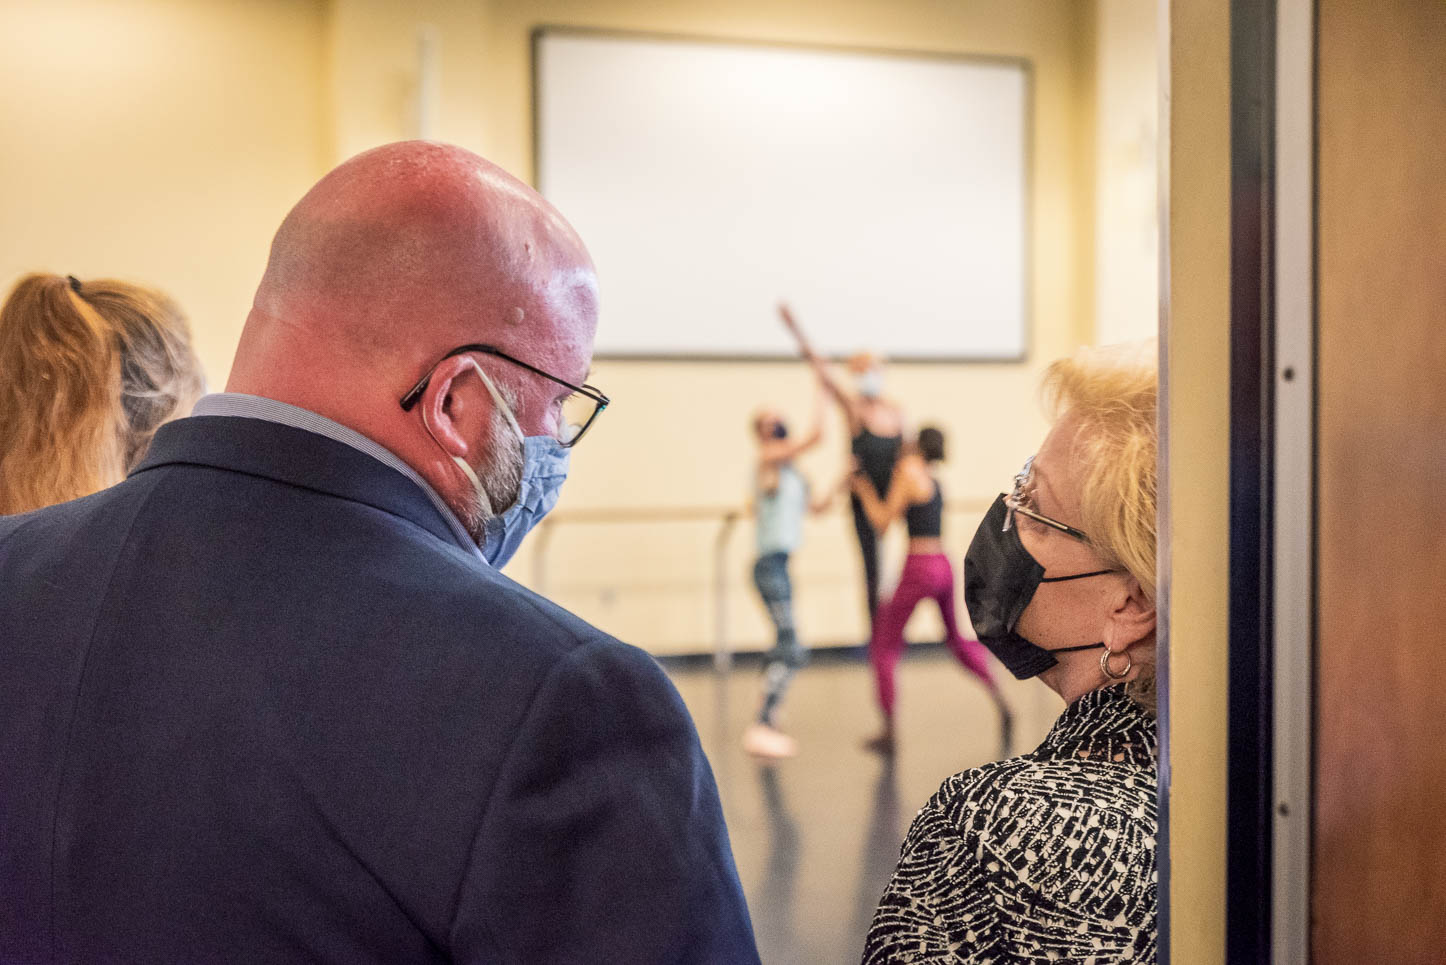 Dean Chris Garvin and President Rhea Law look on as a dance class practices in the USF School of Theatre & Dance.